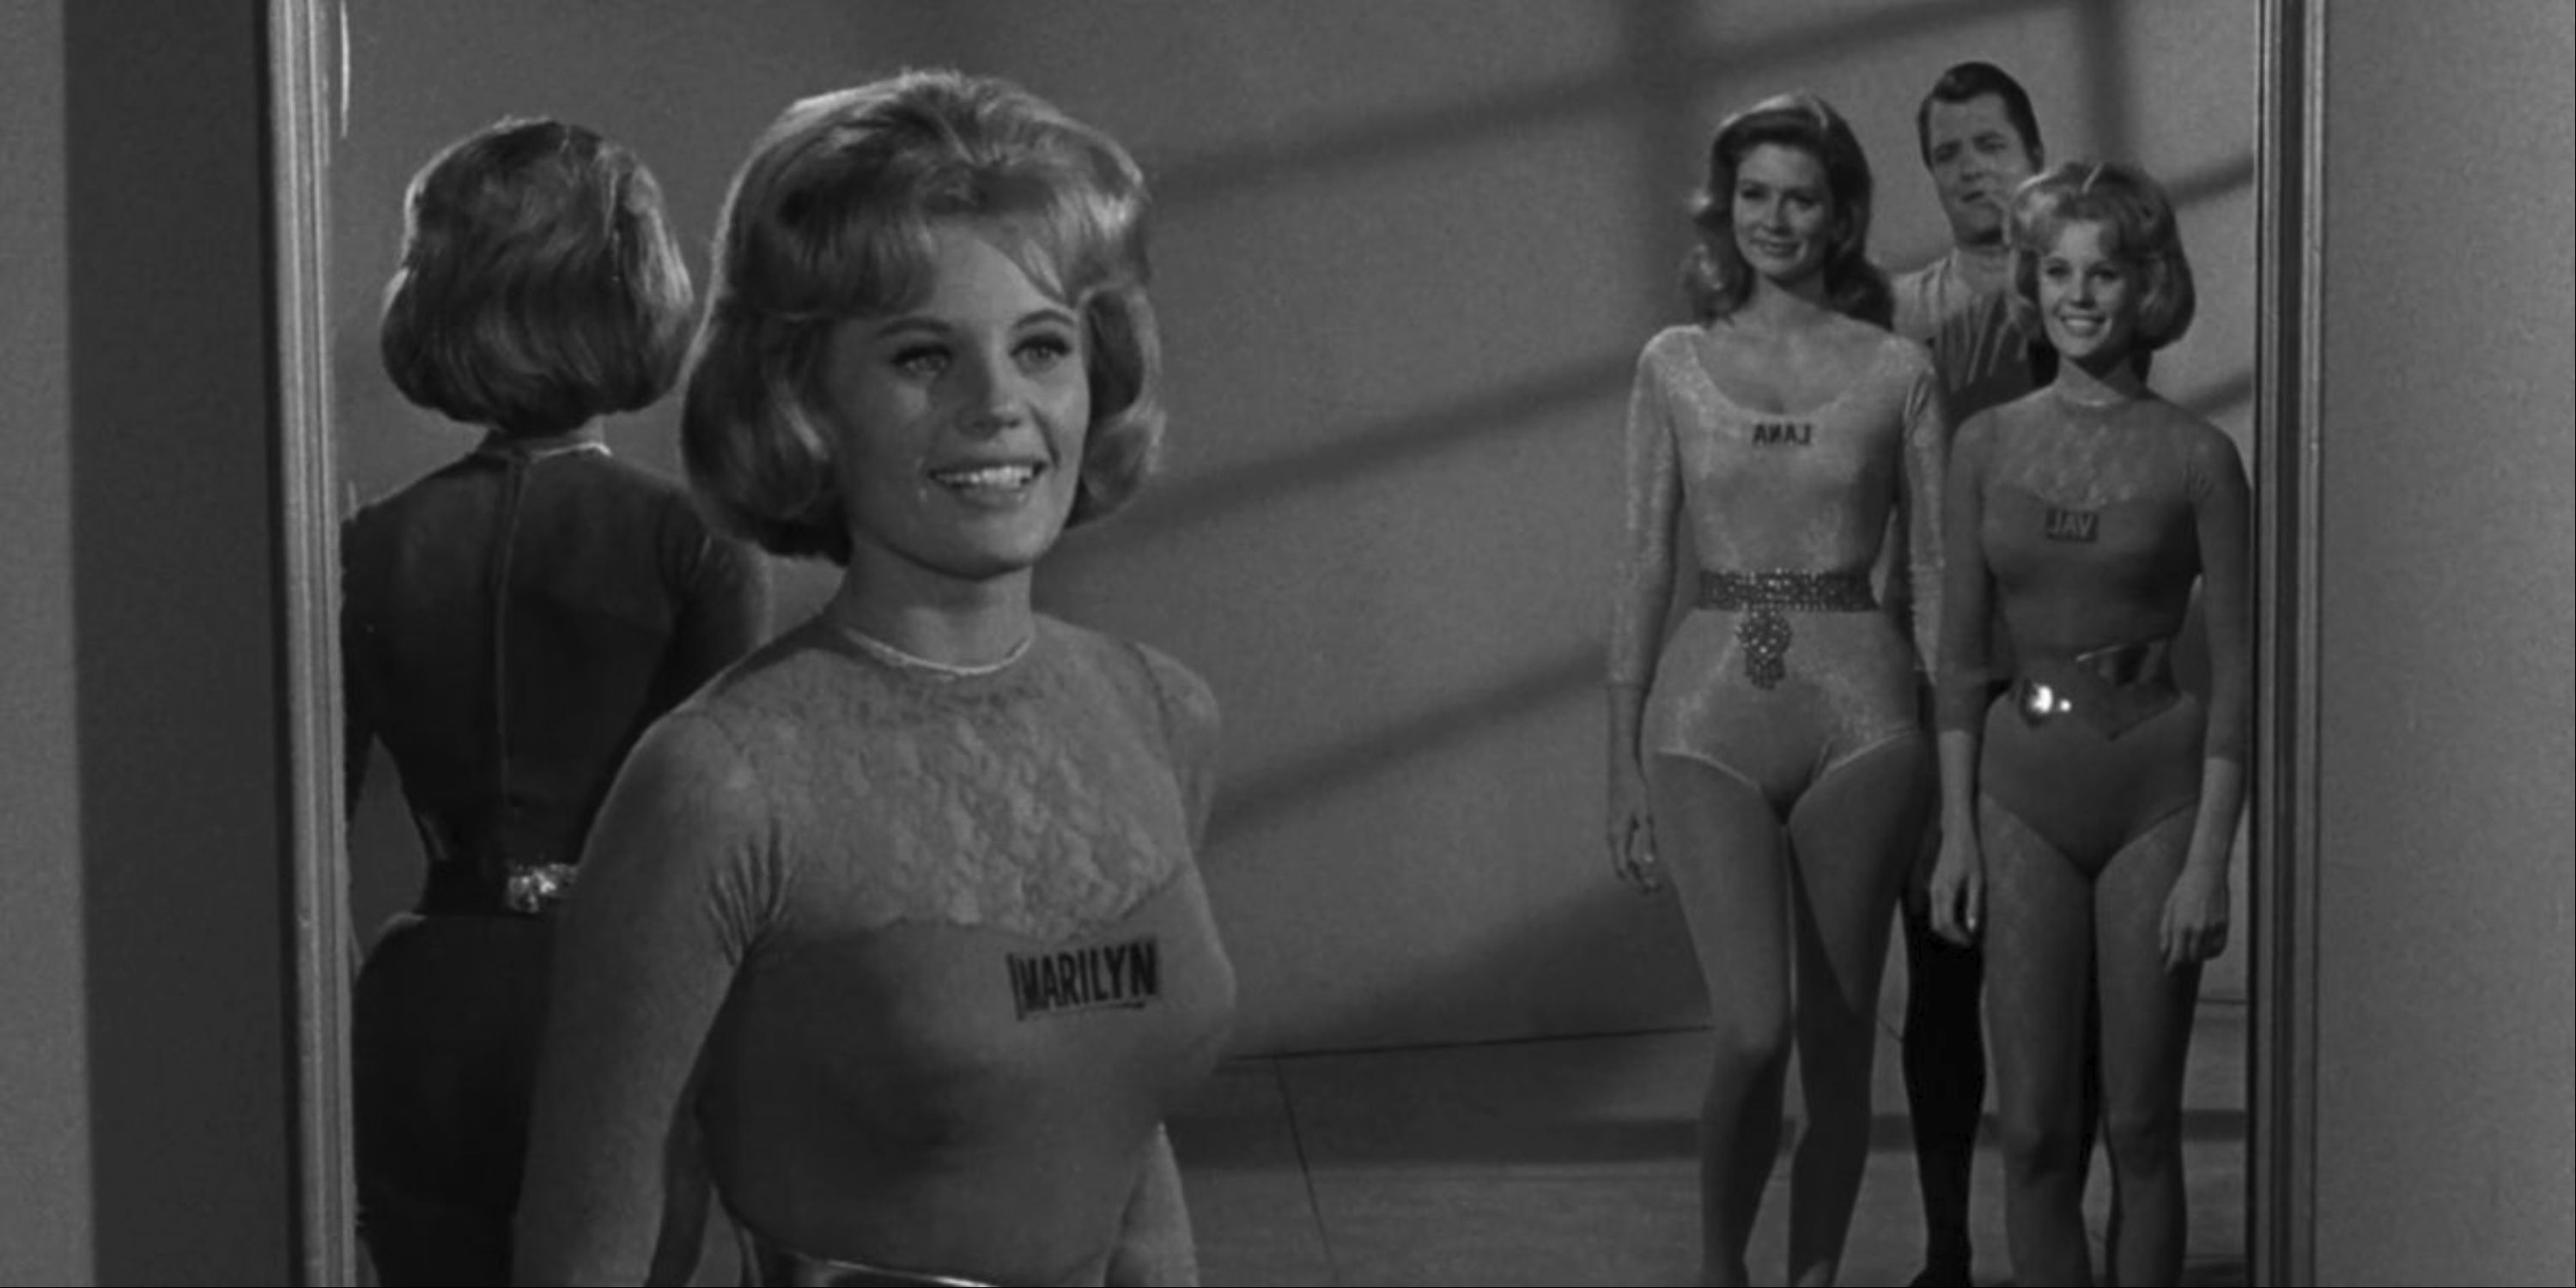 Marilyn from the 'Twilight Zone' episode 'Number 12 Looks Just Like You' Season 5 Episode 17 